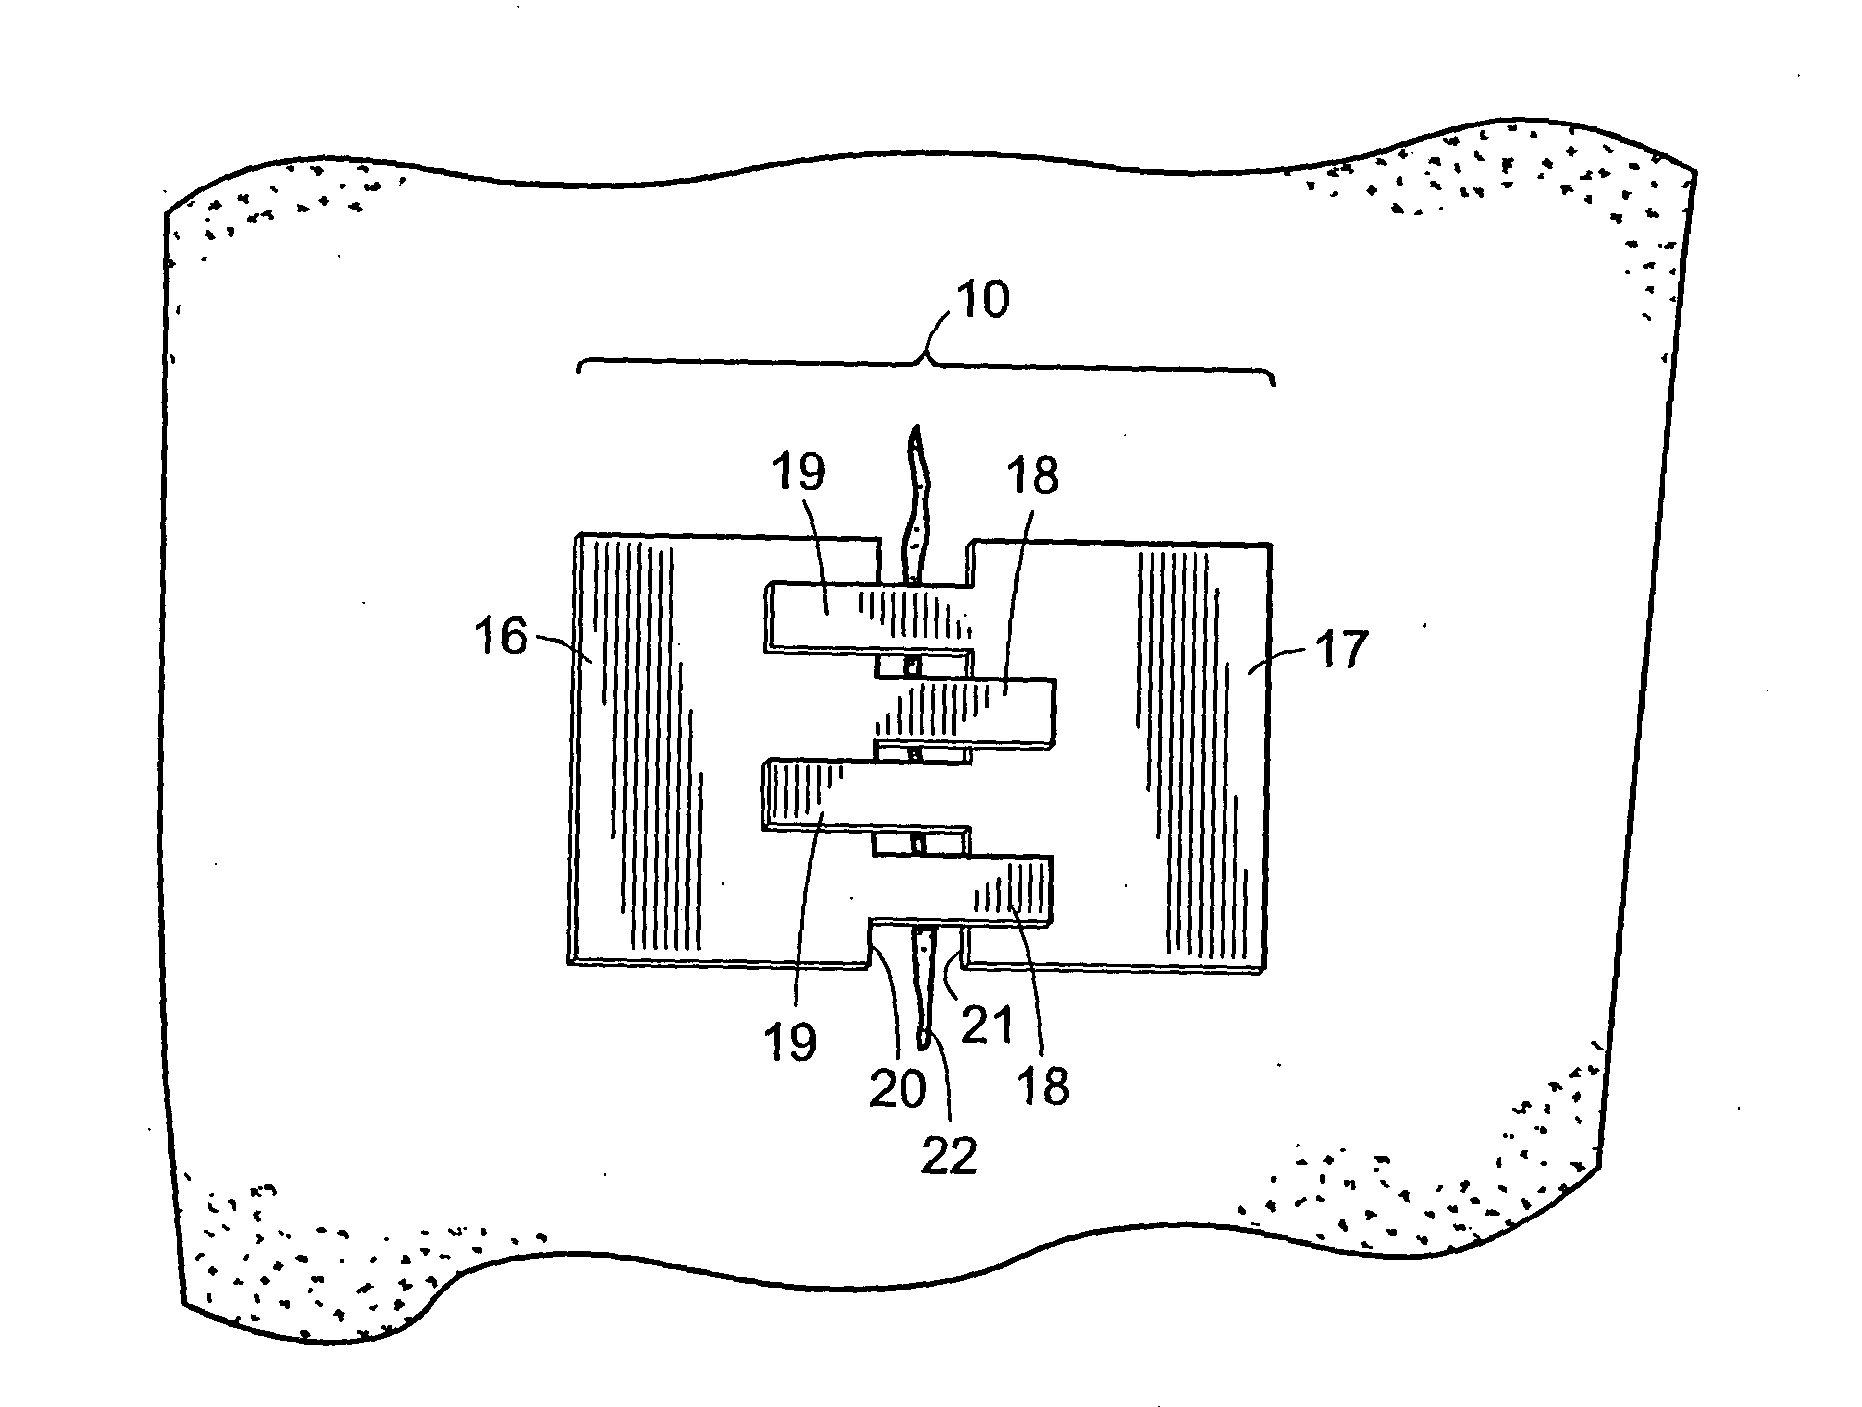 Device for laceration or incision closure